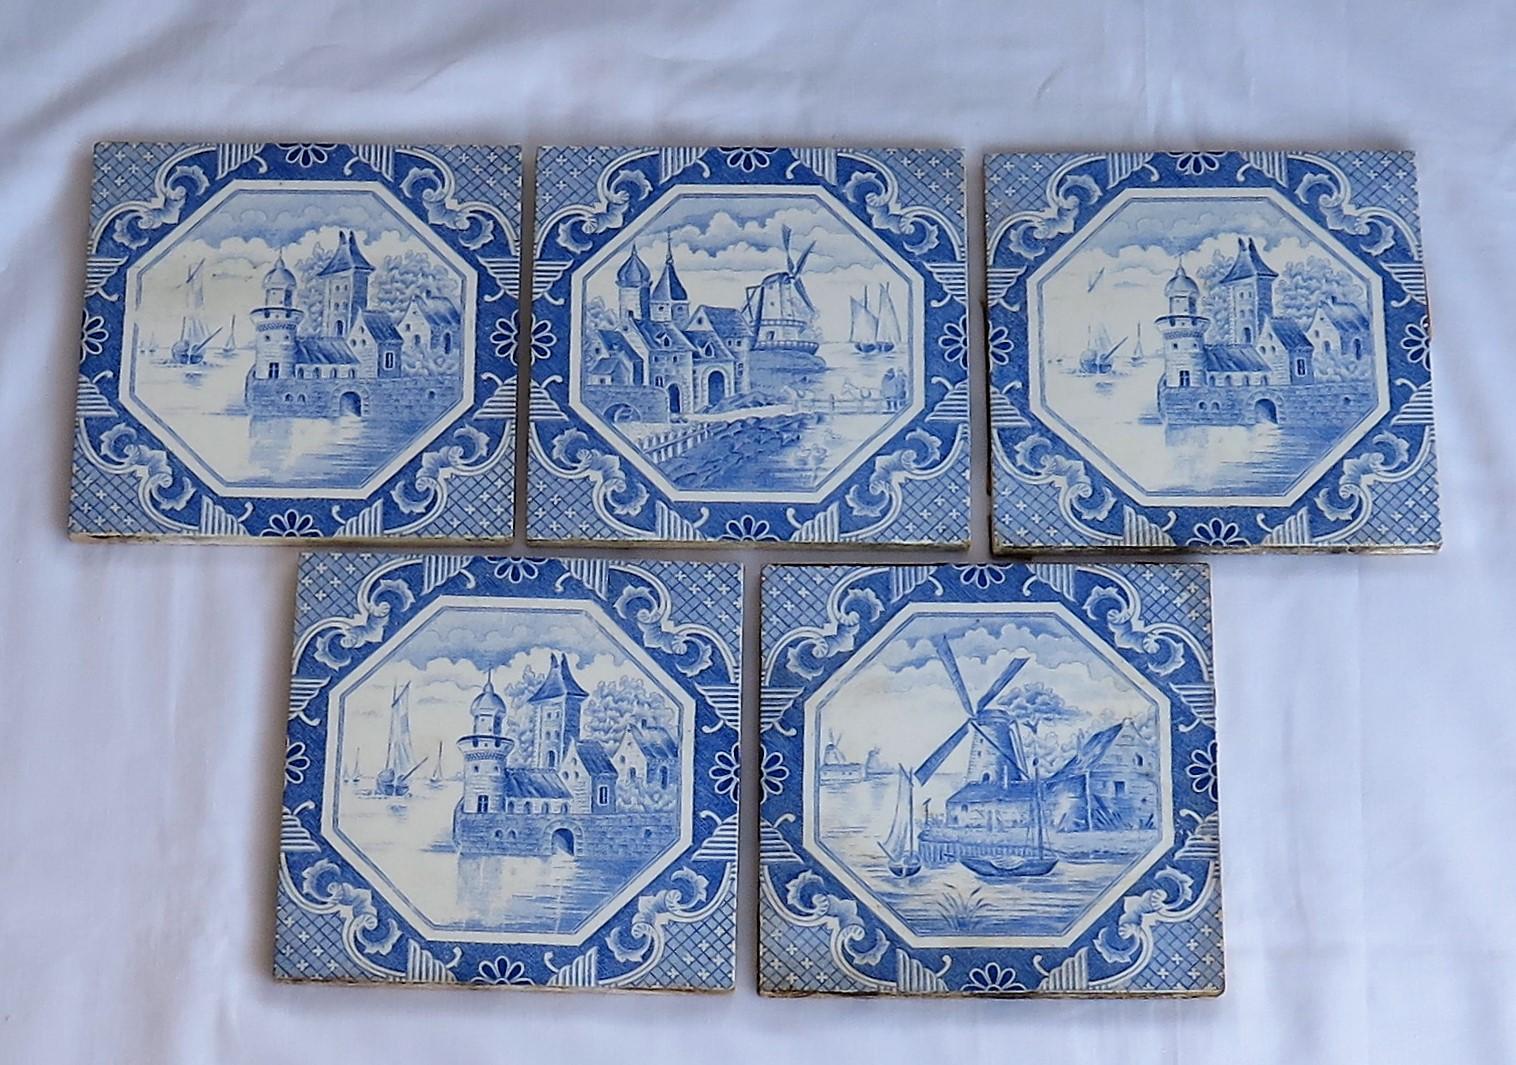 Glazed Set of Five Ceramic Wall Tiles Delft Style Blue and White Pattern, circa 1920s